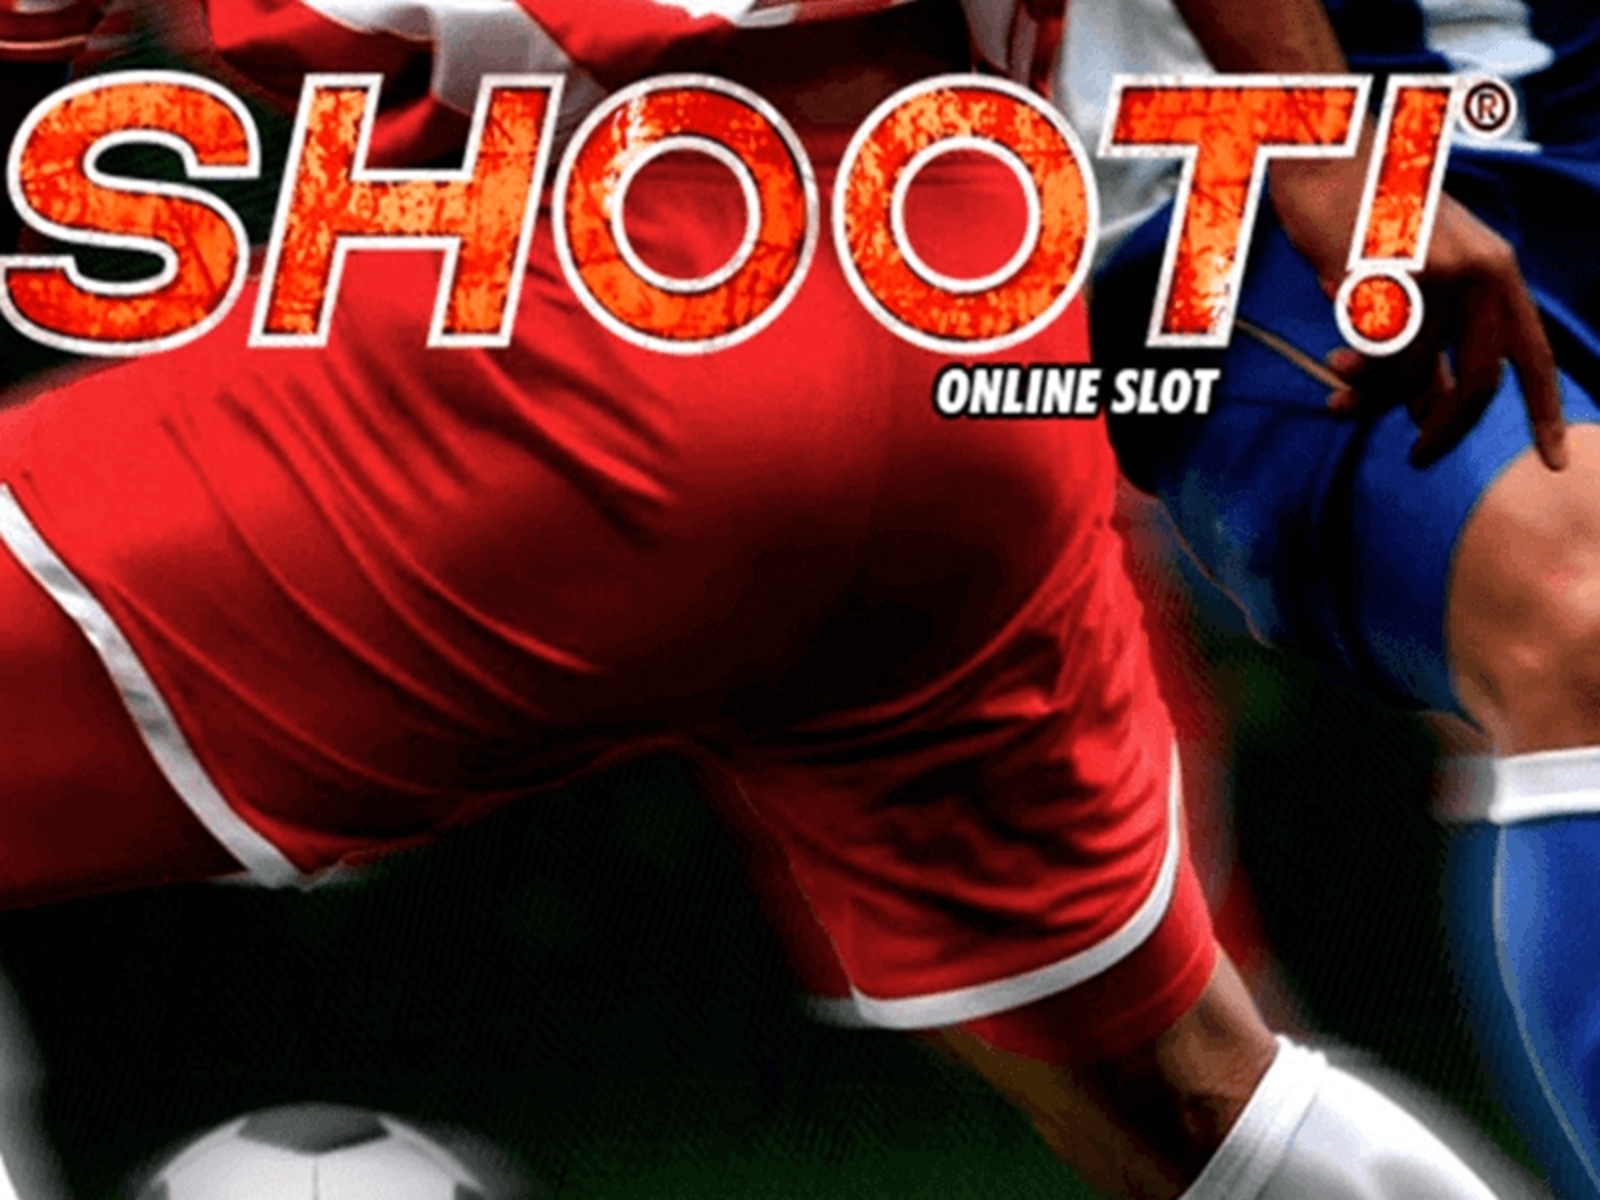 The Shoot! Online Slot Demo Game by Microgaming